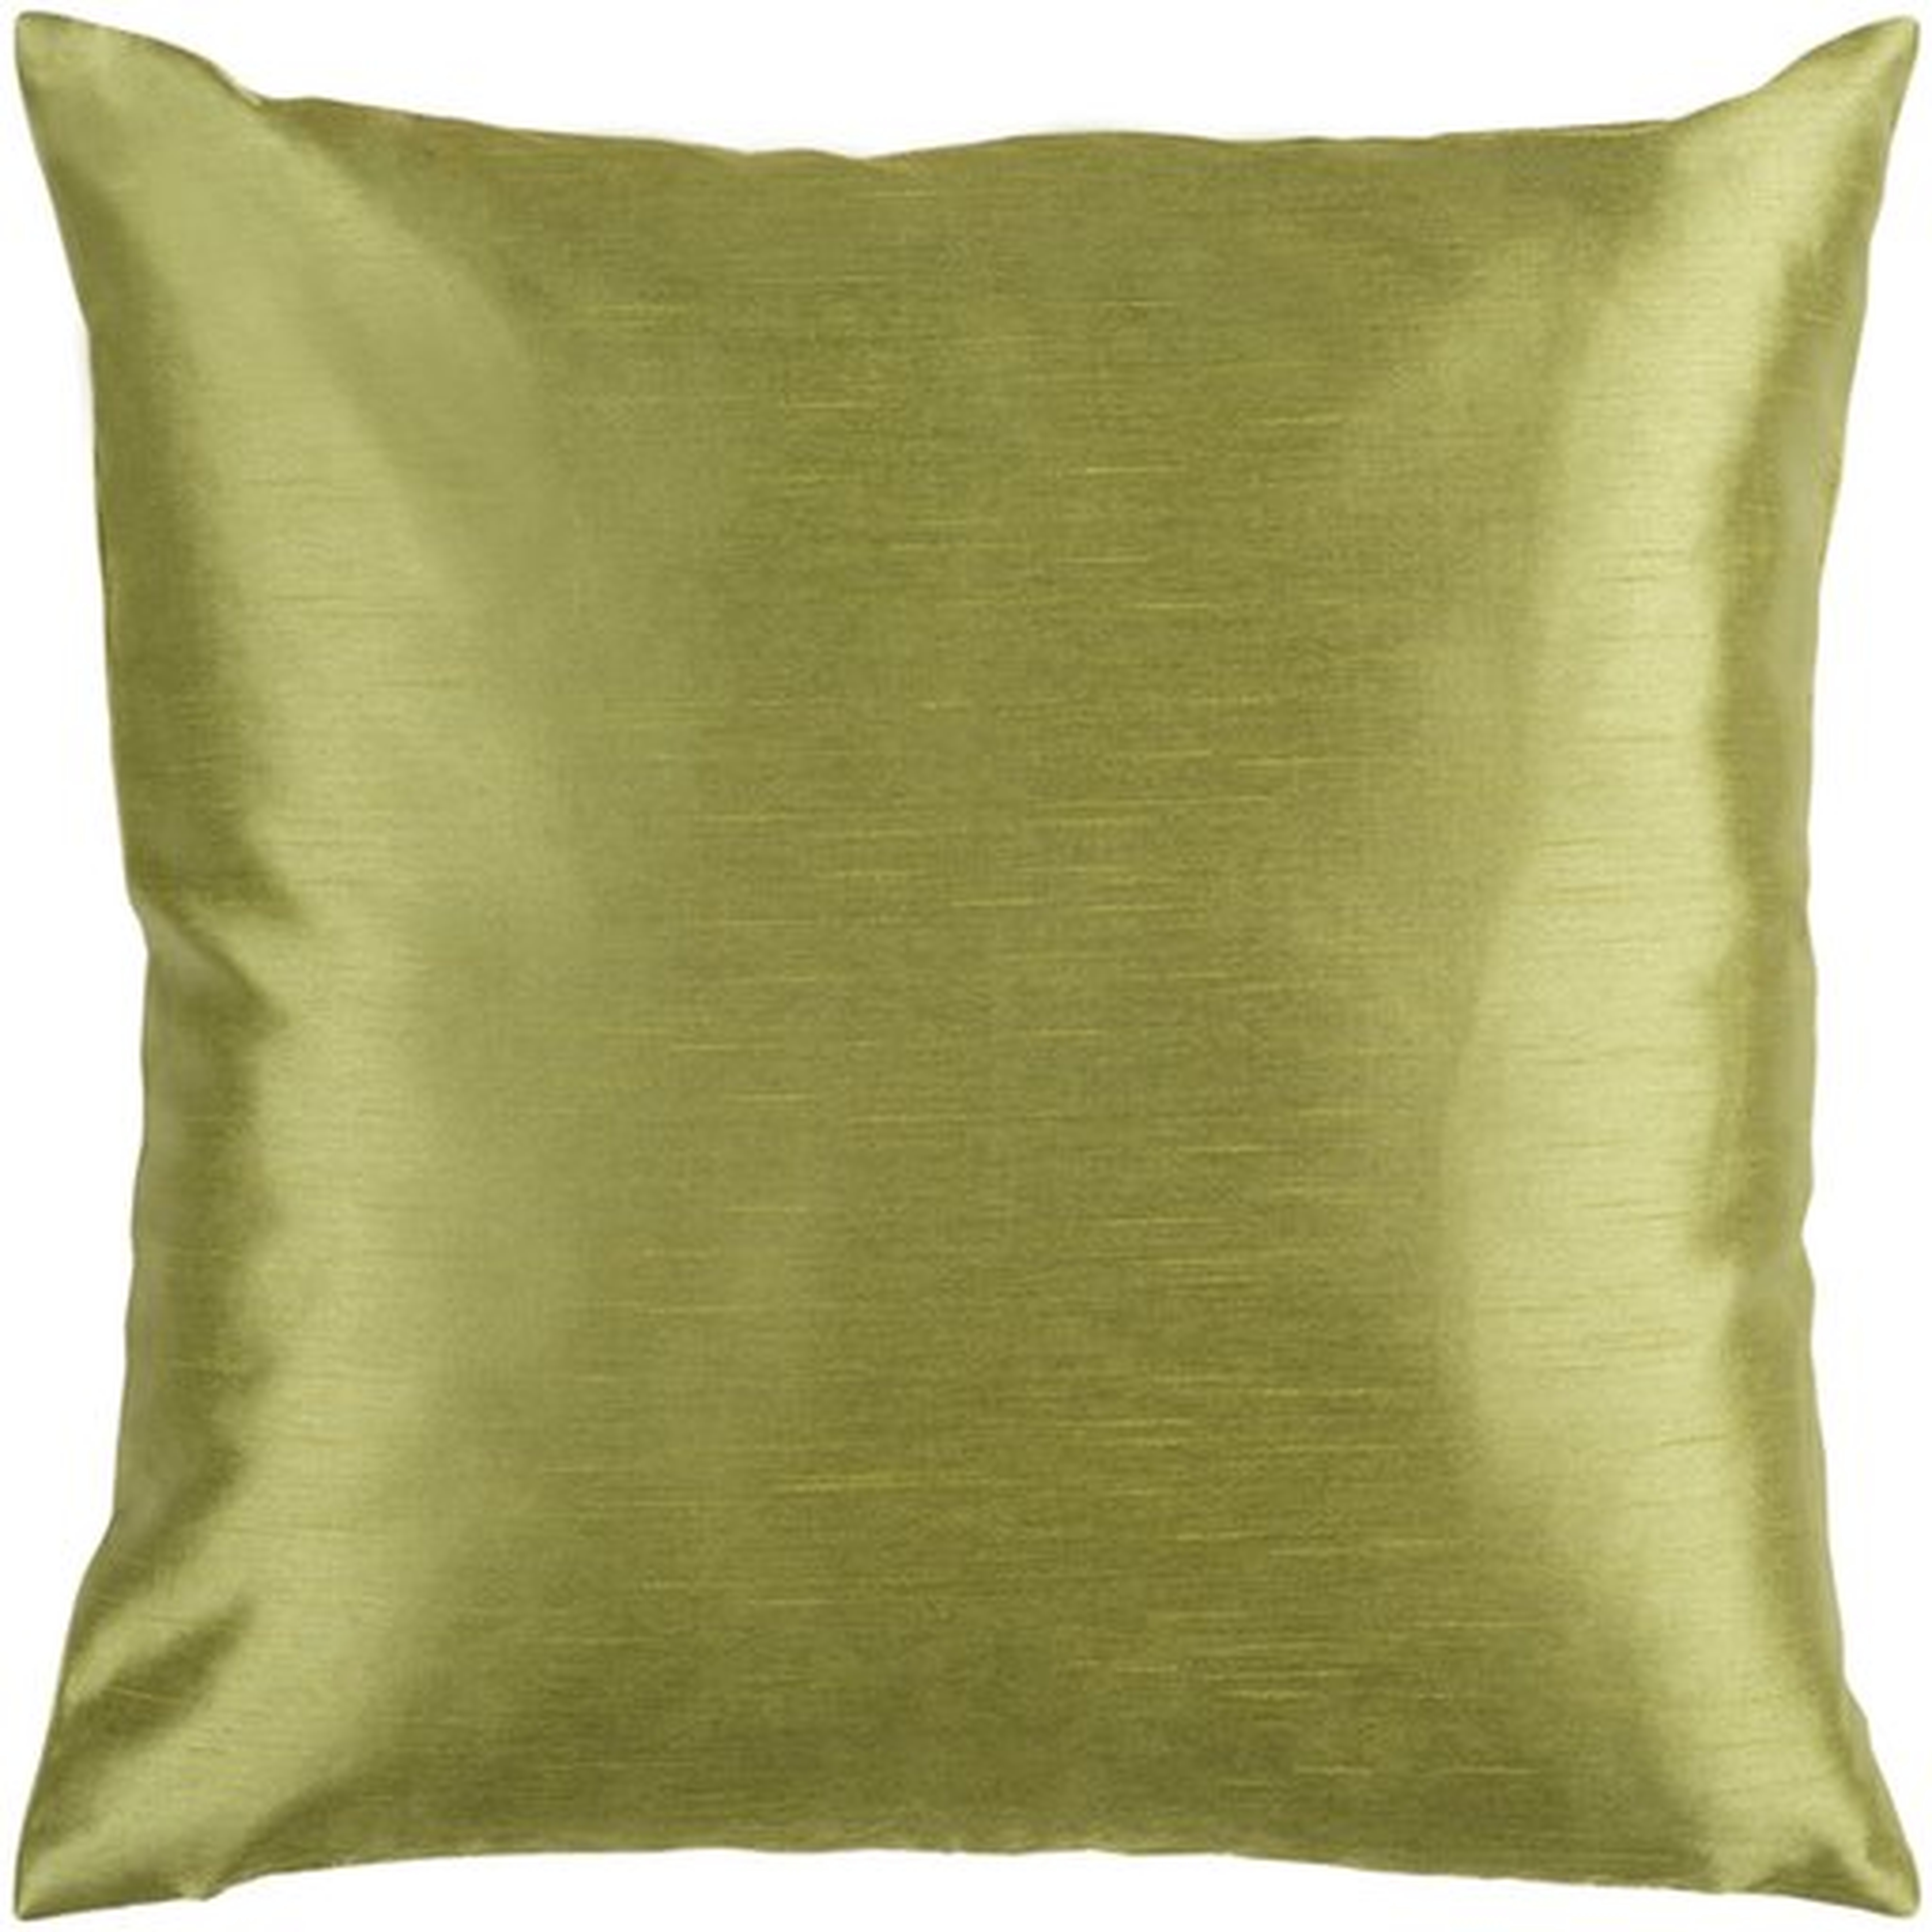 Solid Luxe Throw Pillow, 18" x 18", with down insert - Surya